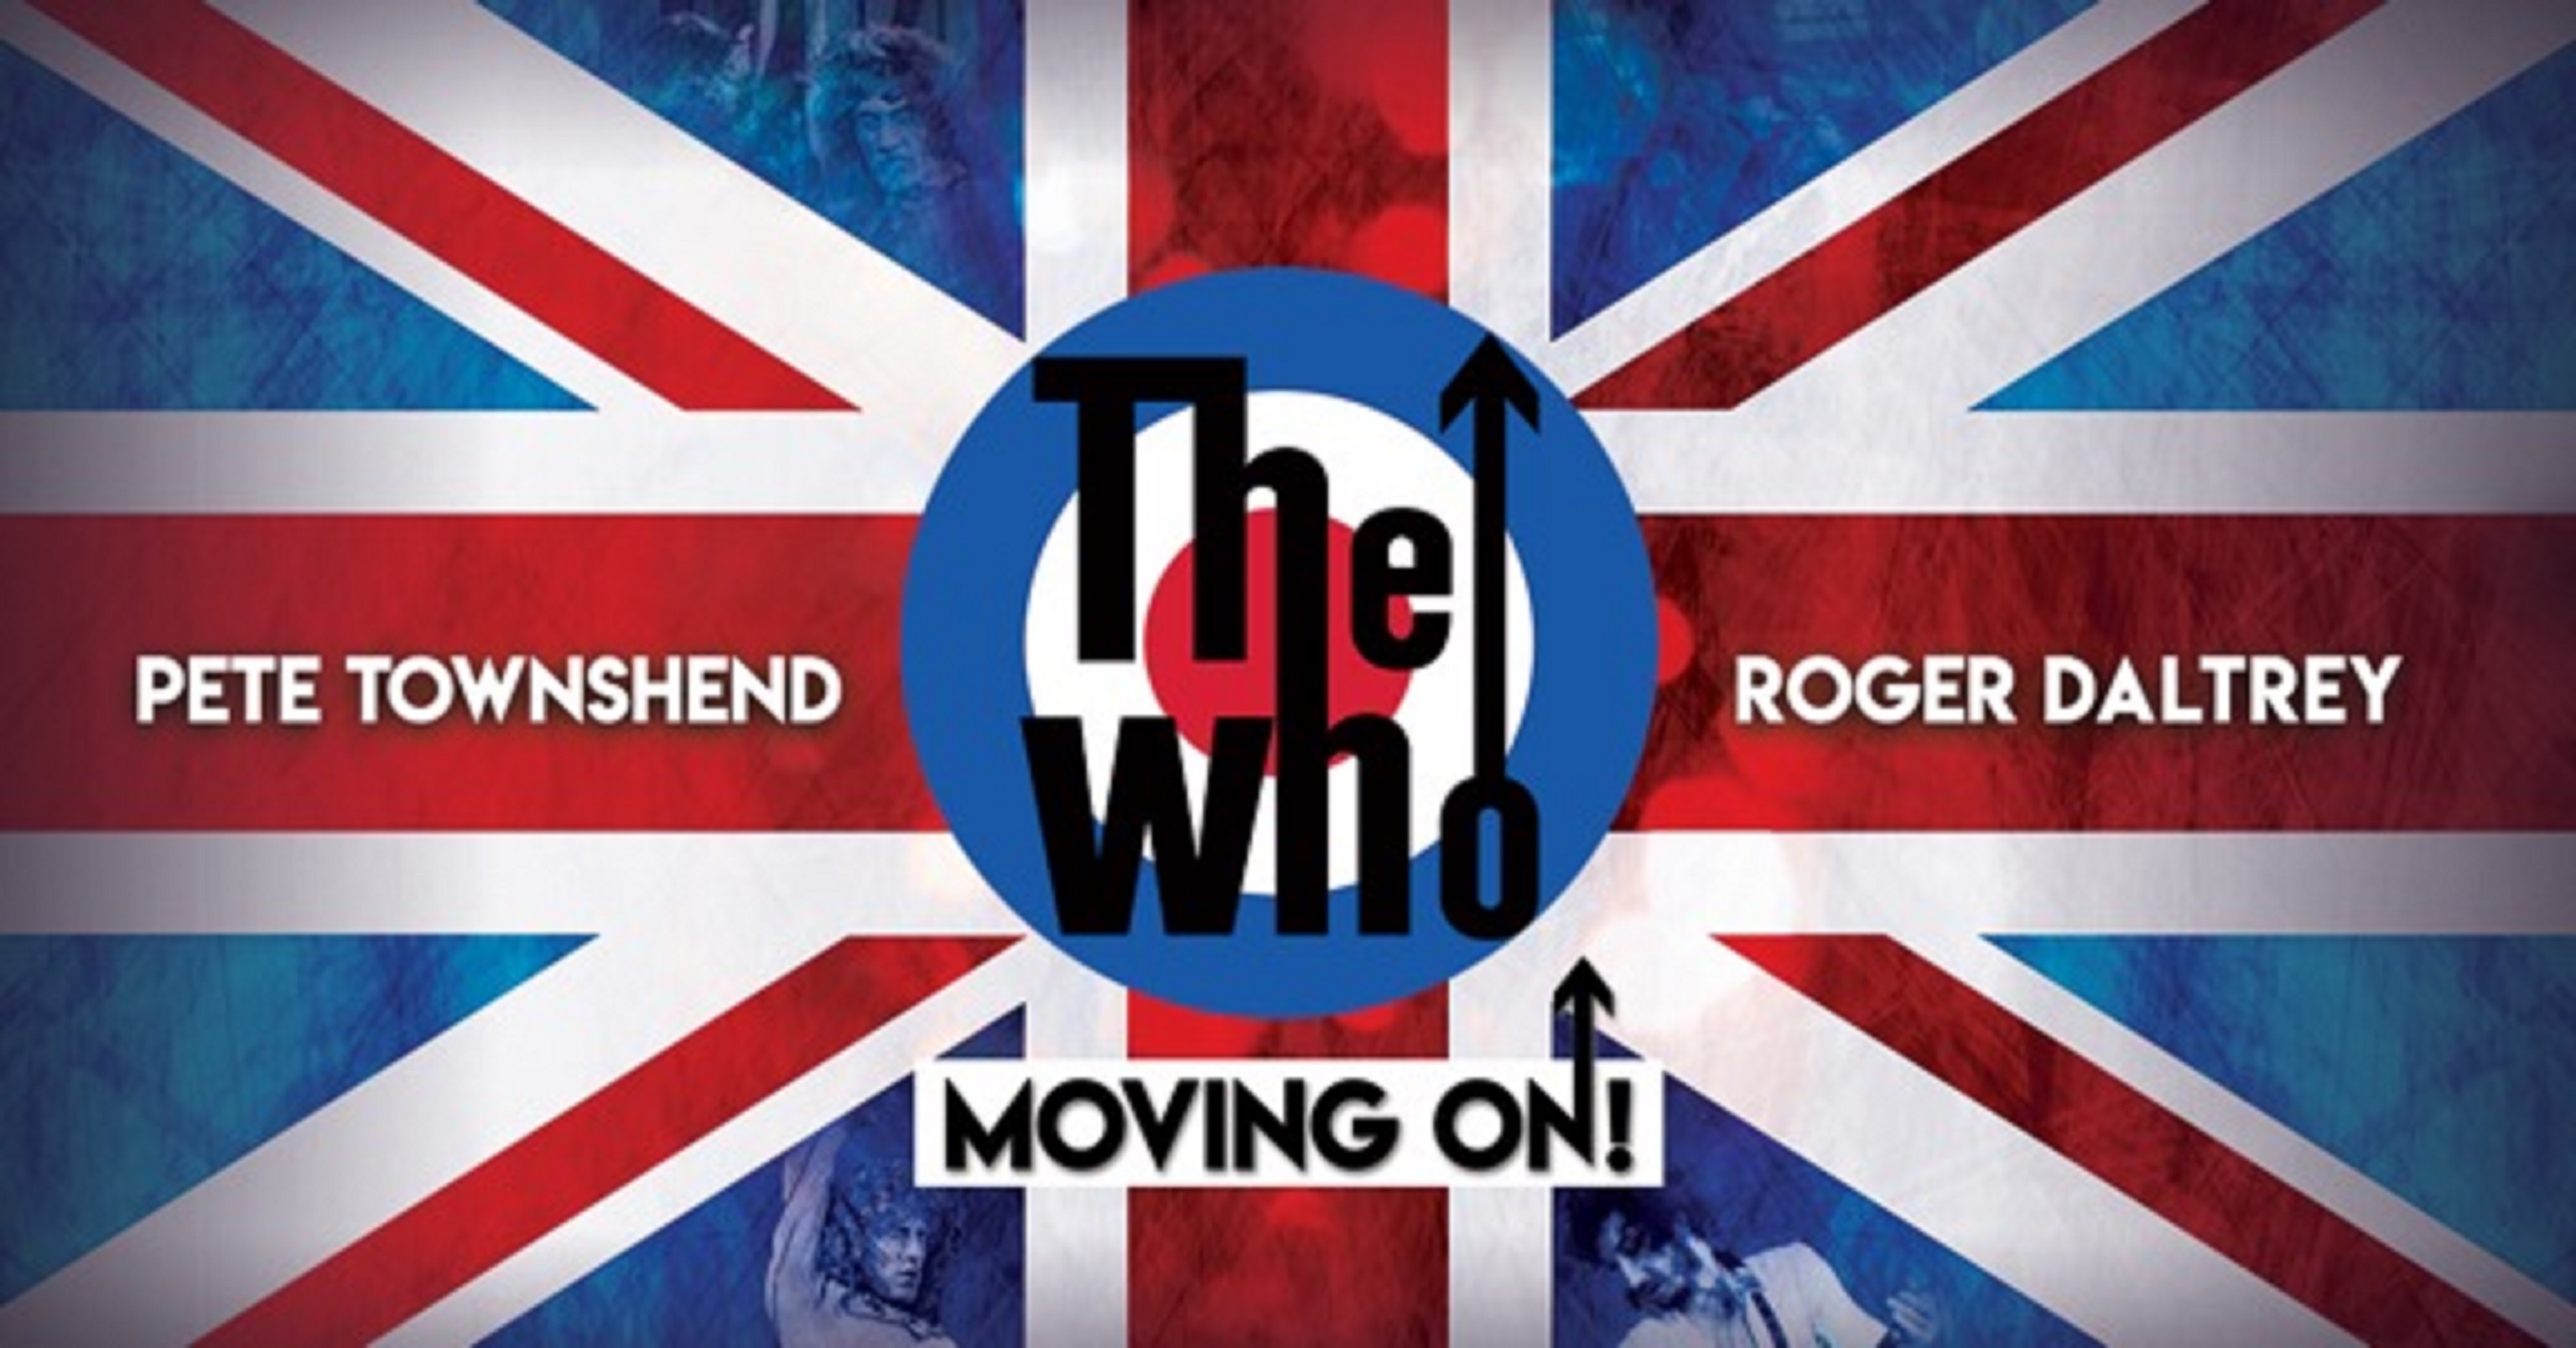 The Who Announces Special Guests for Moving On! Tour